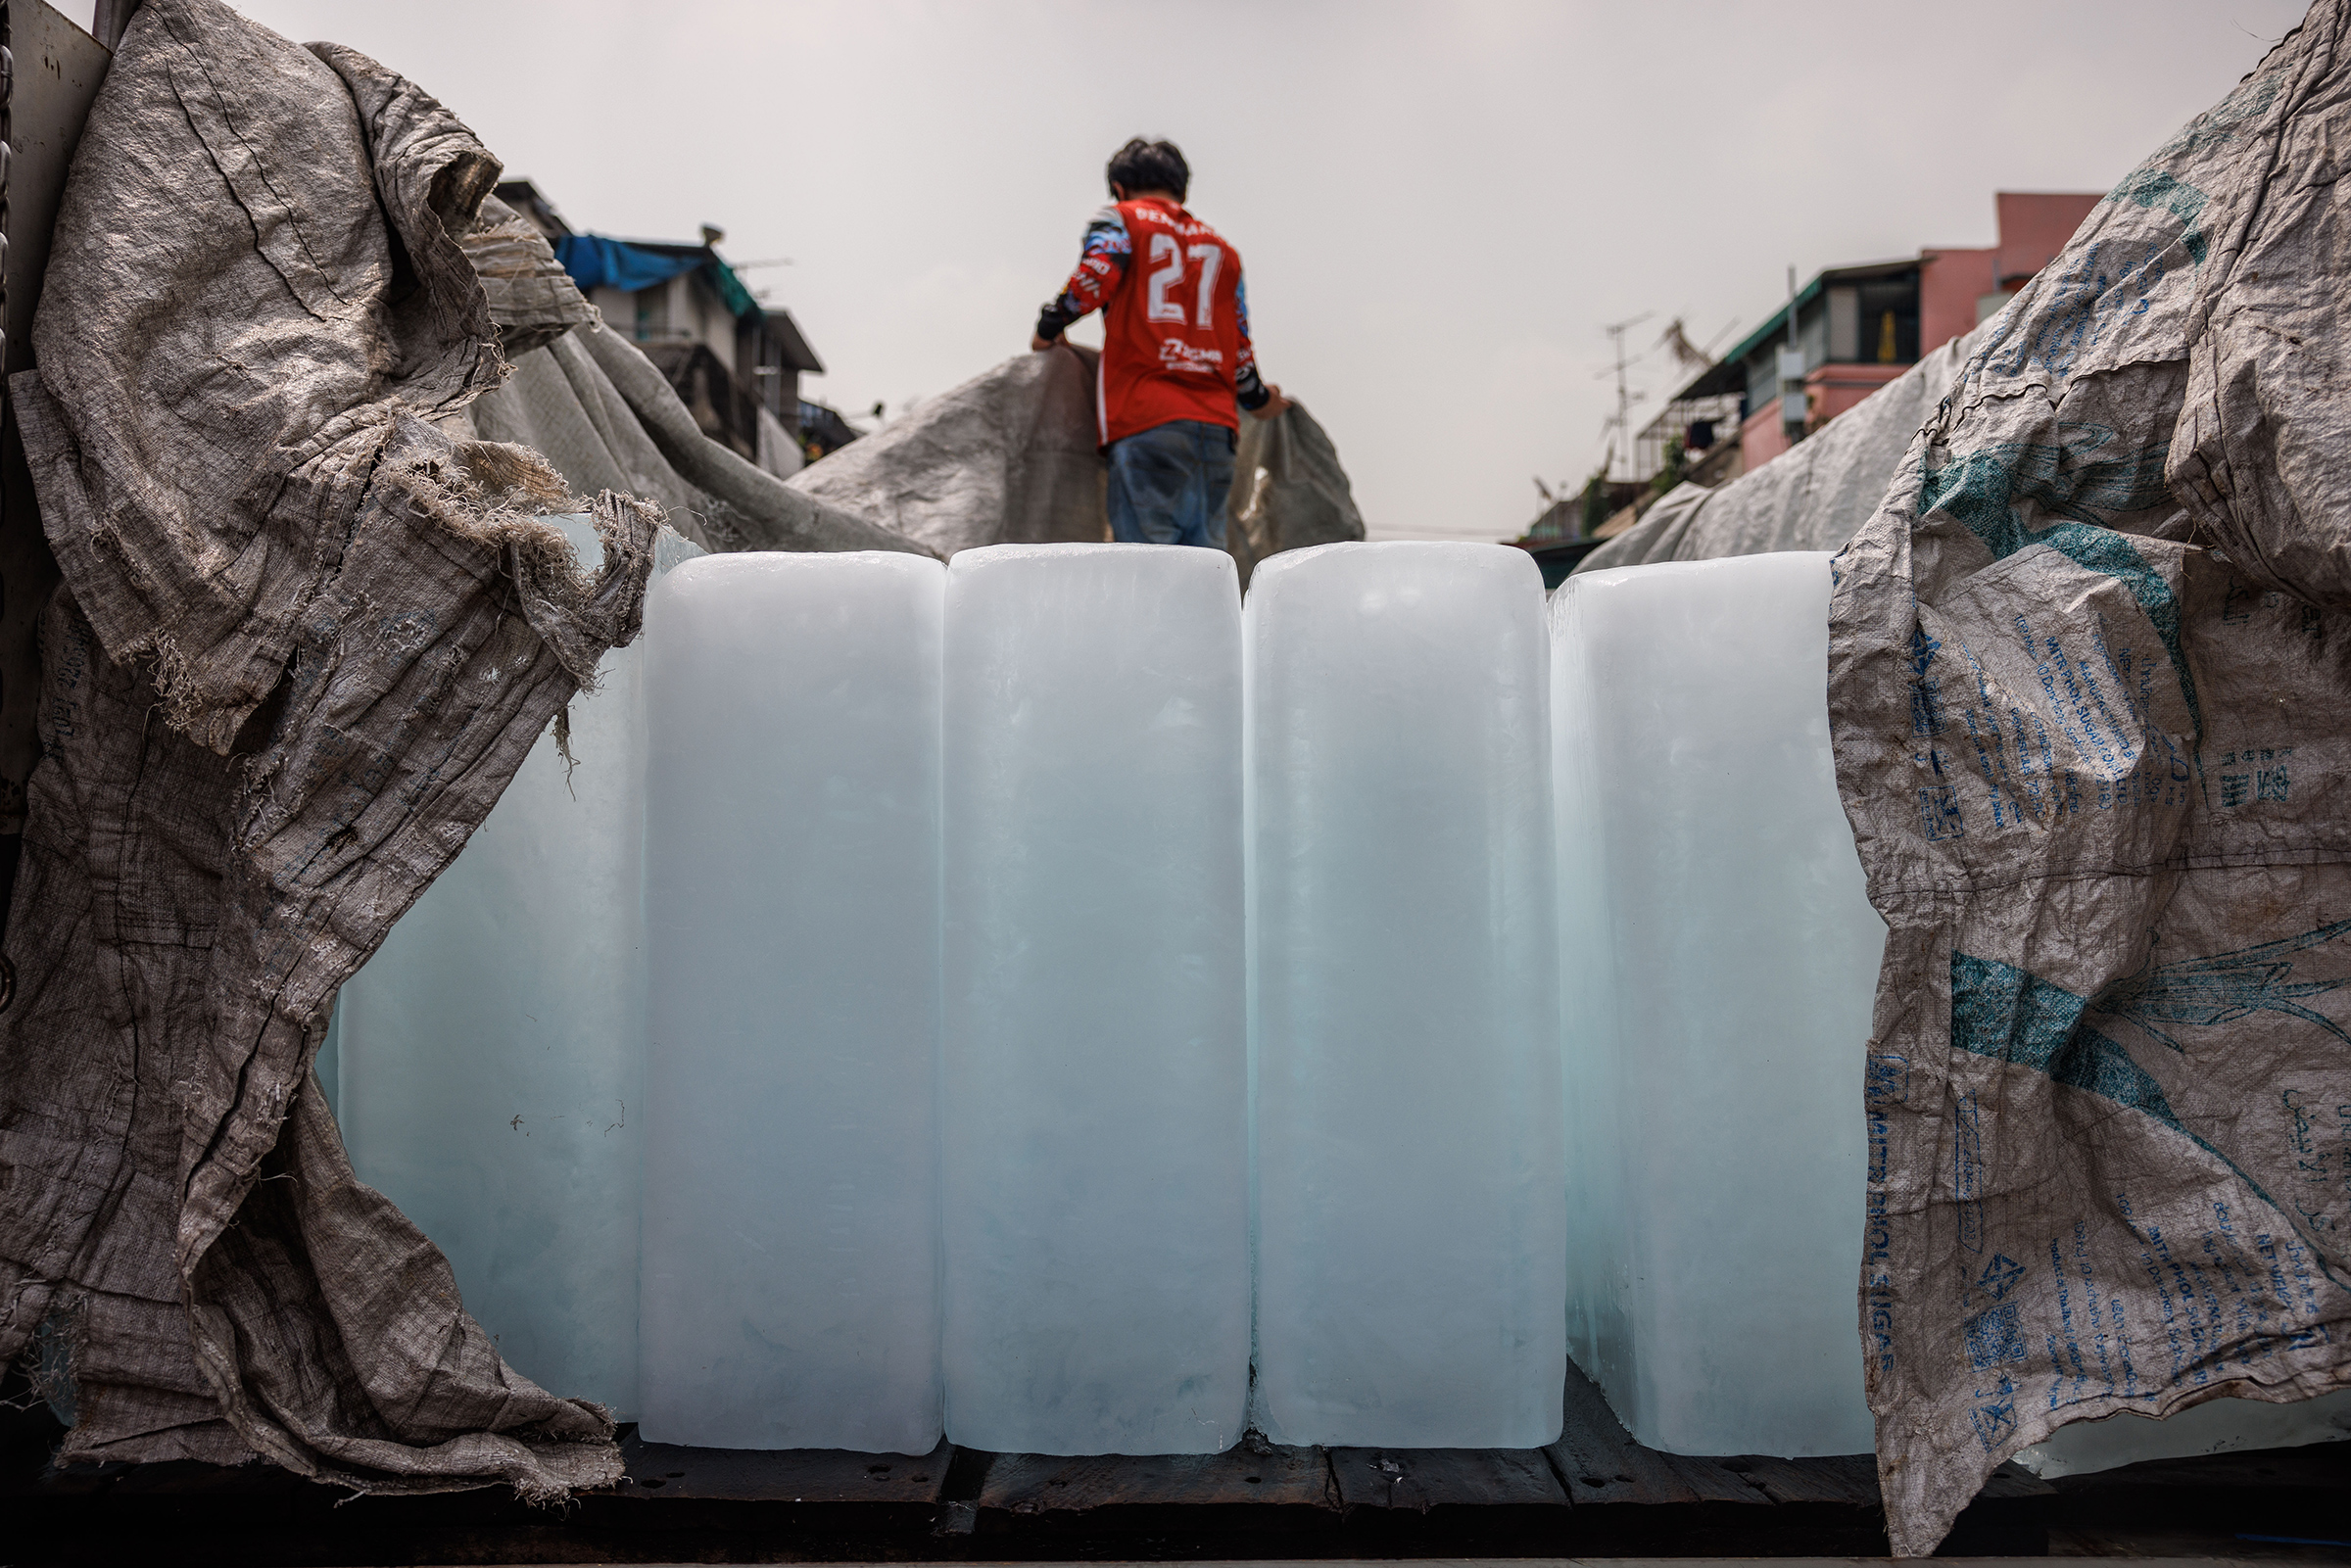 Blocks of ice on a lorry at a wet market during a heat wave in Bangkok on April 27. (Andre Malerba—Bloomberg/Getty Images)